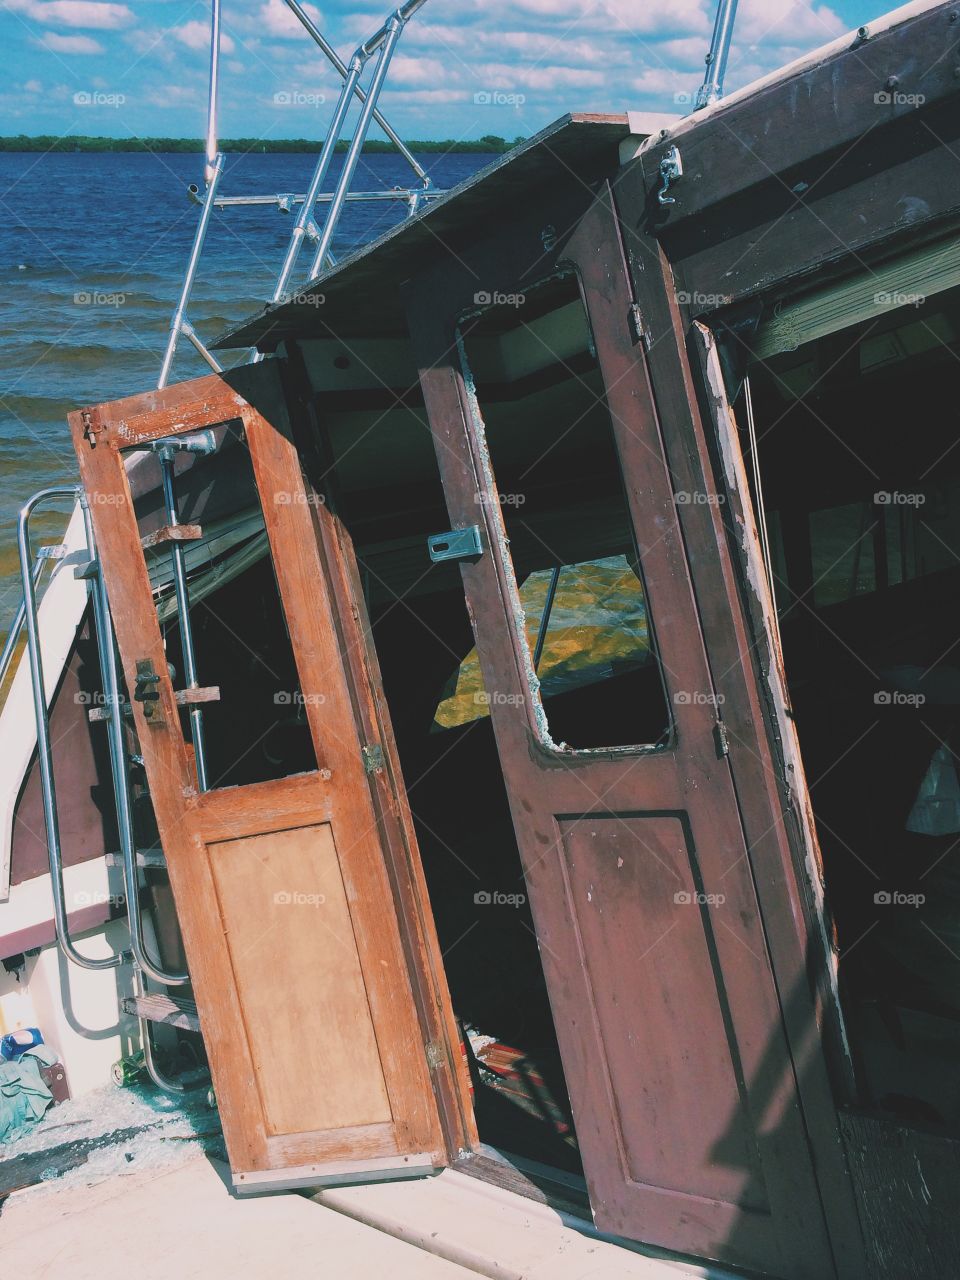 Broken windows of a boat after a wind storm in Florida.